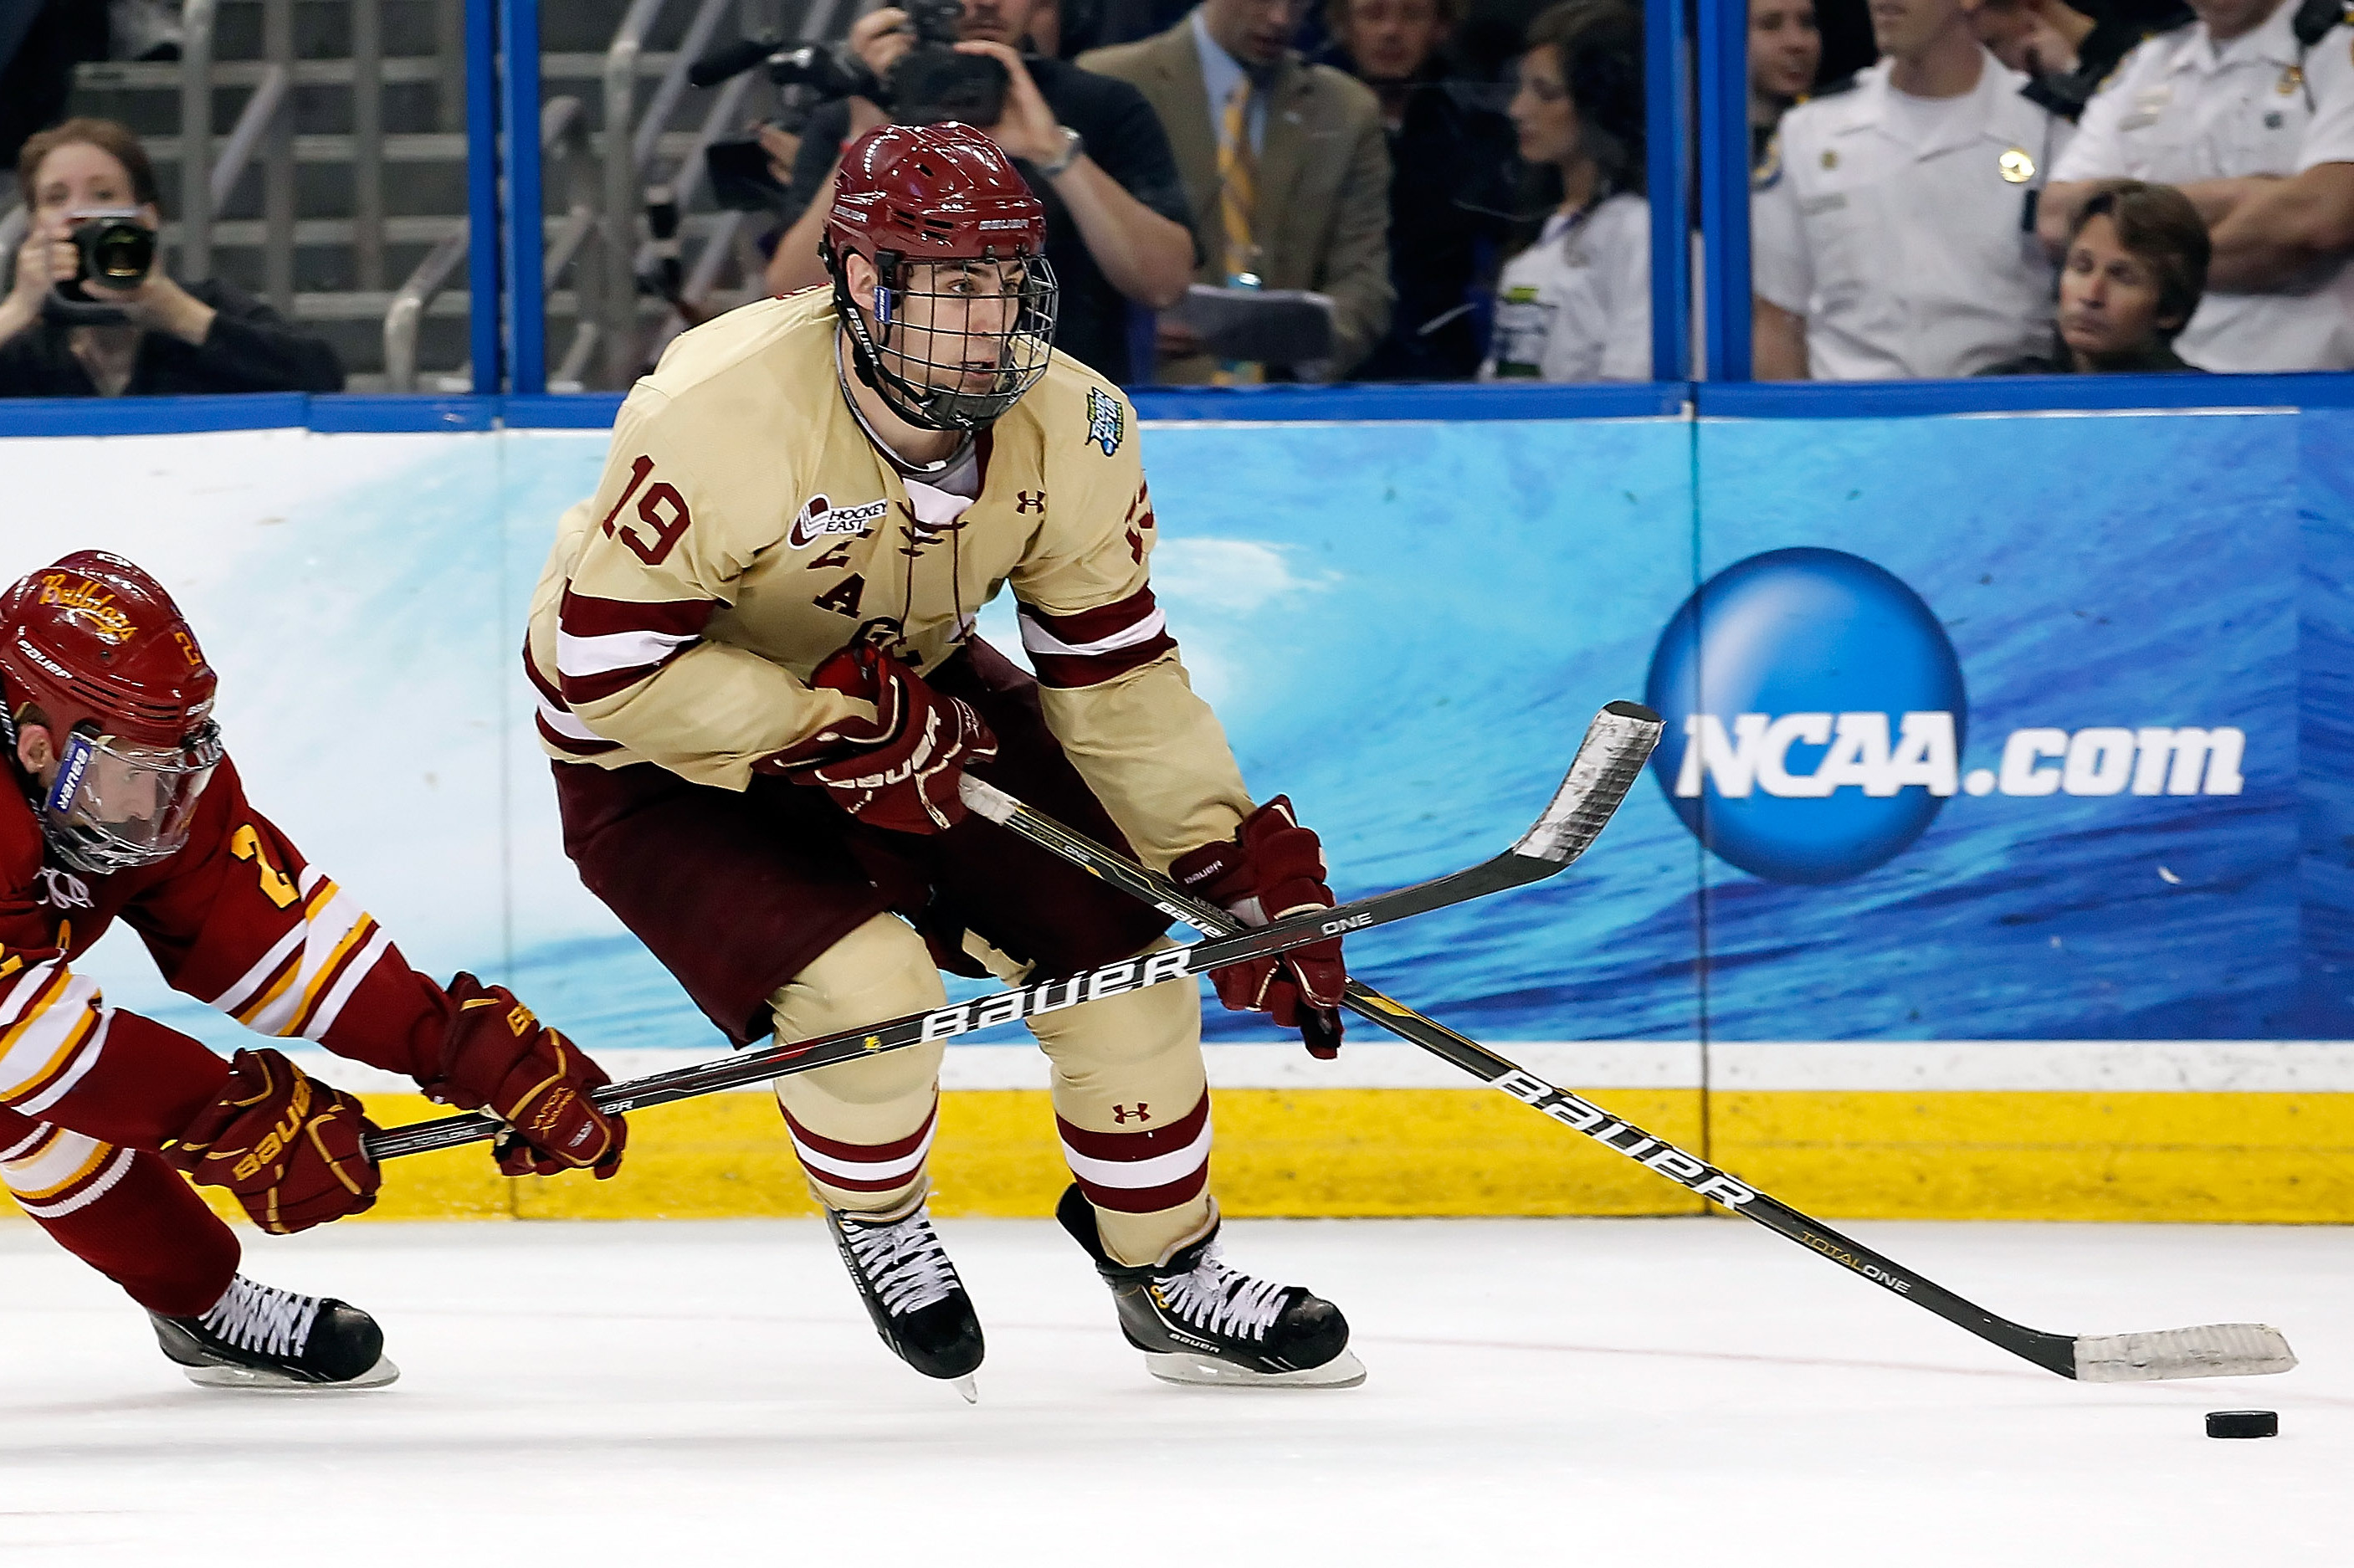 Boxford's Kreider hopes to help BC hockey to another NCAA title tonight, Sports